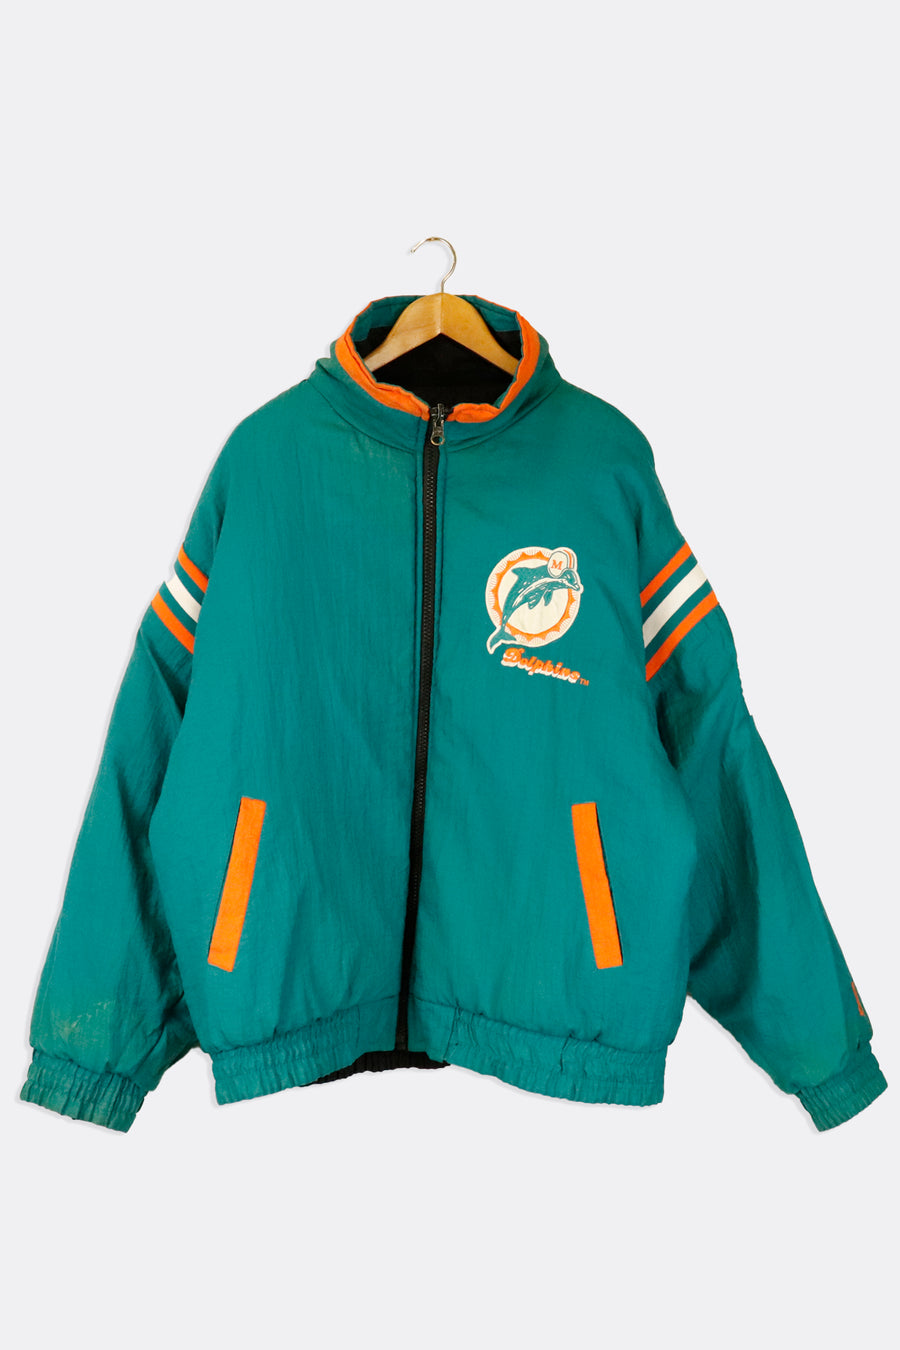 Vintage Nfl Miami Dolphins Full Zip Reversable Embroidered Patches Puff Jacket Quarter Collar Jacket